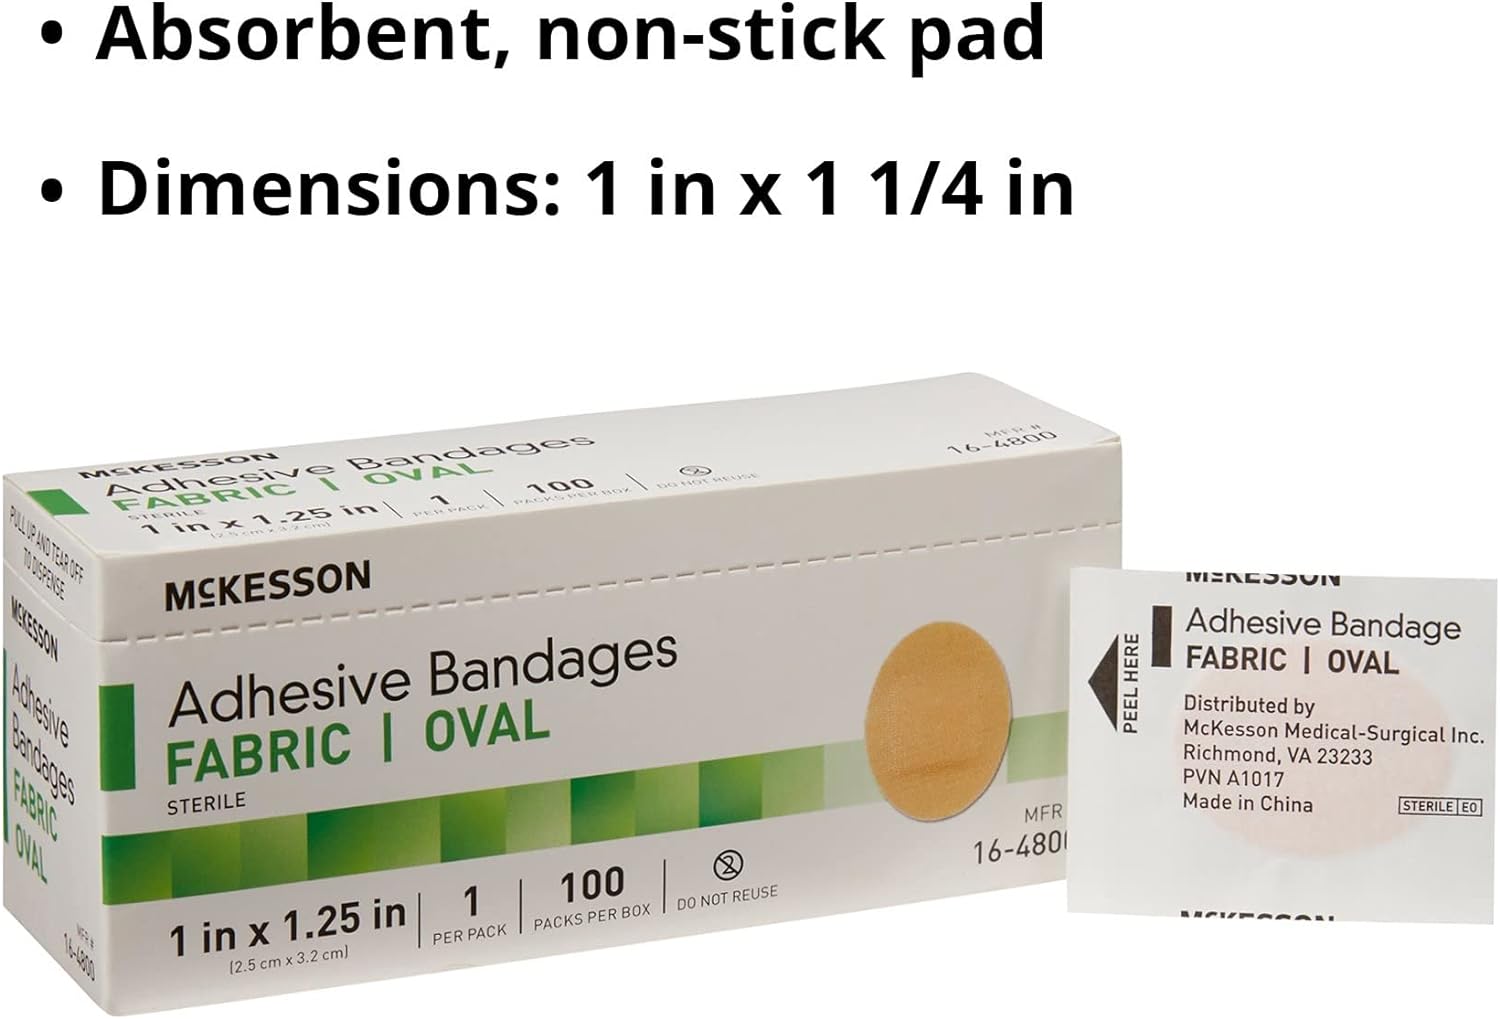 McKesson Adhesive Bandages, Sterile, Fabric Oval, 1 in x 1 1/4 in, 100 Count, 24 Packs, 2400 Total